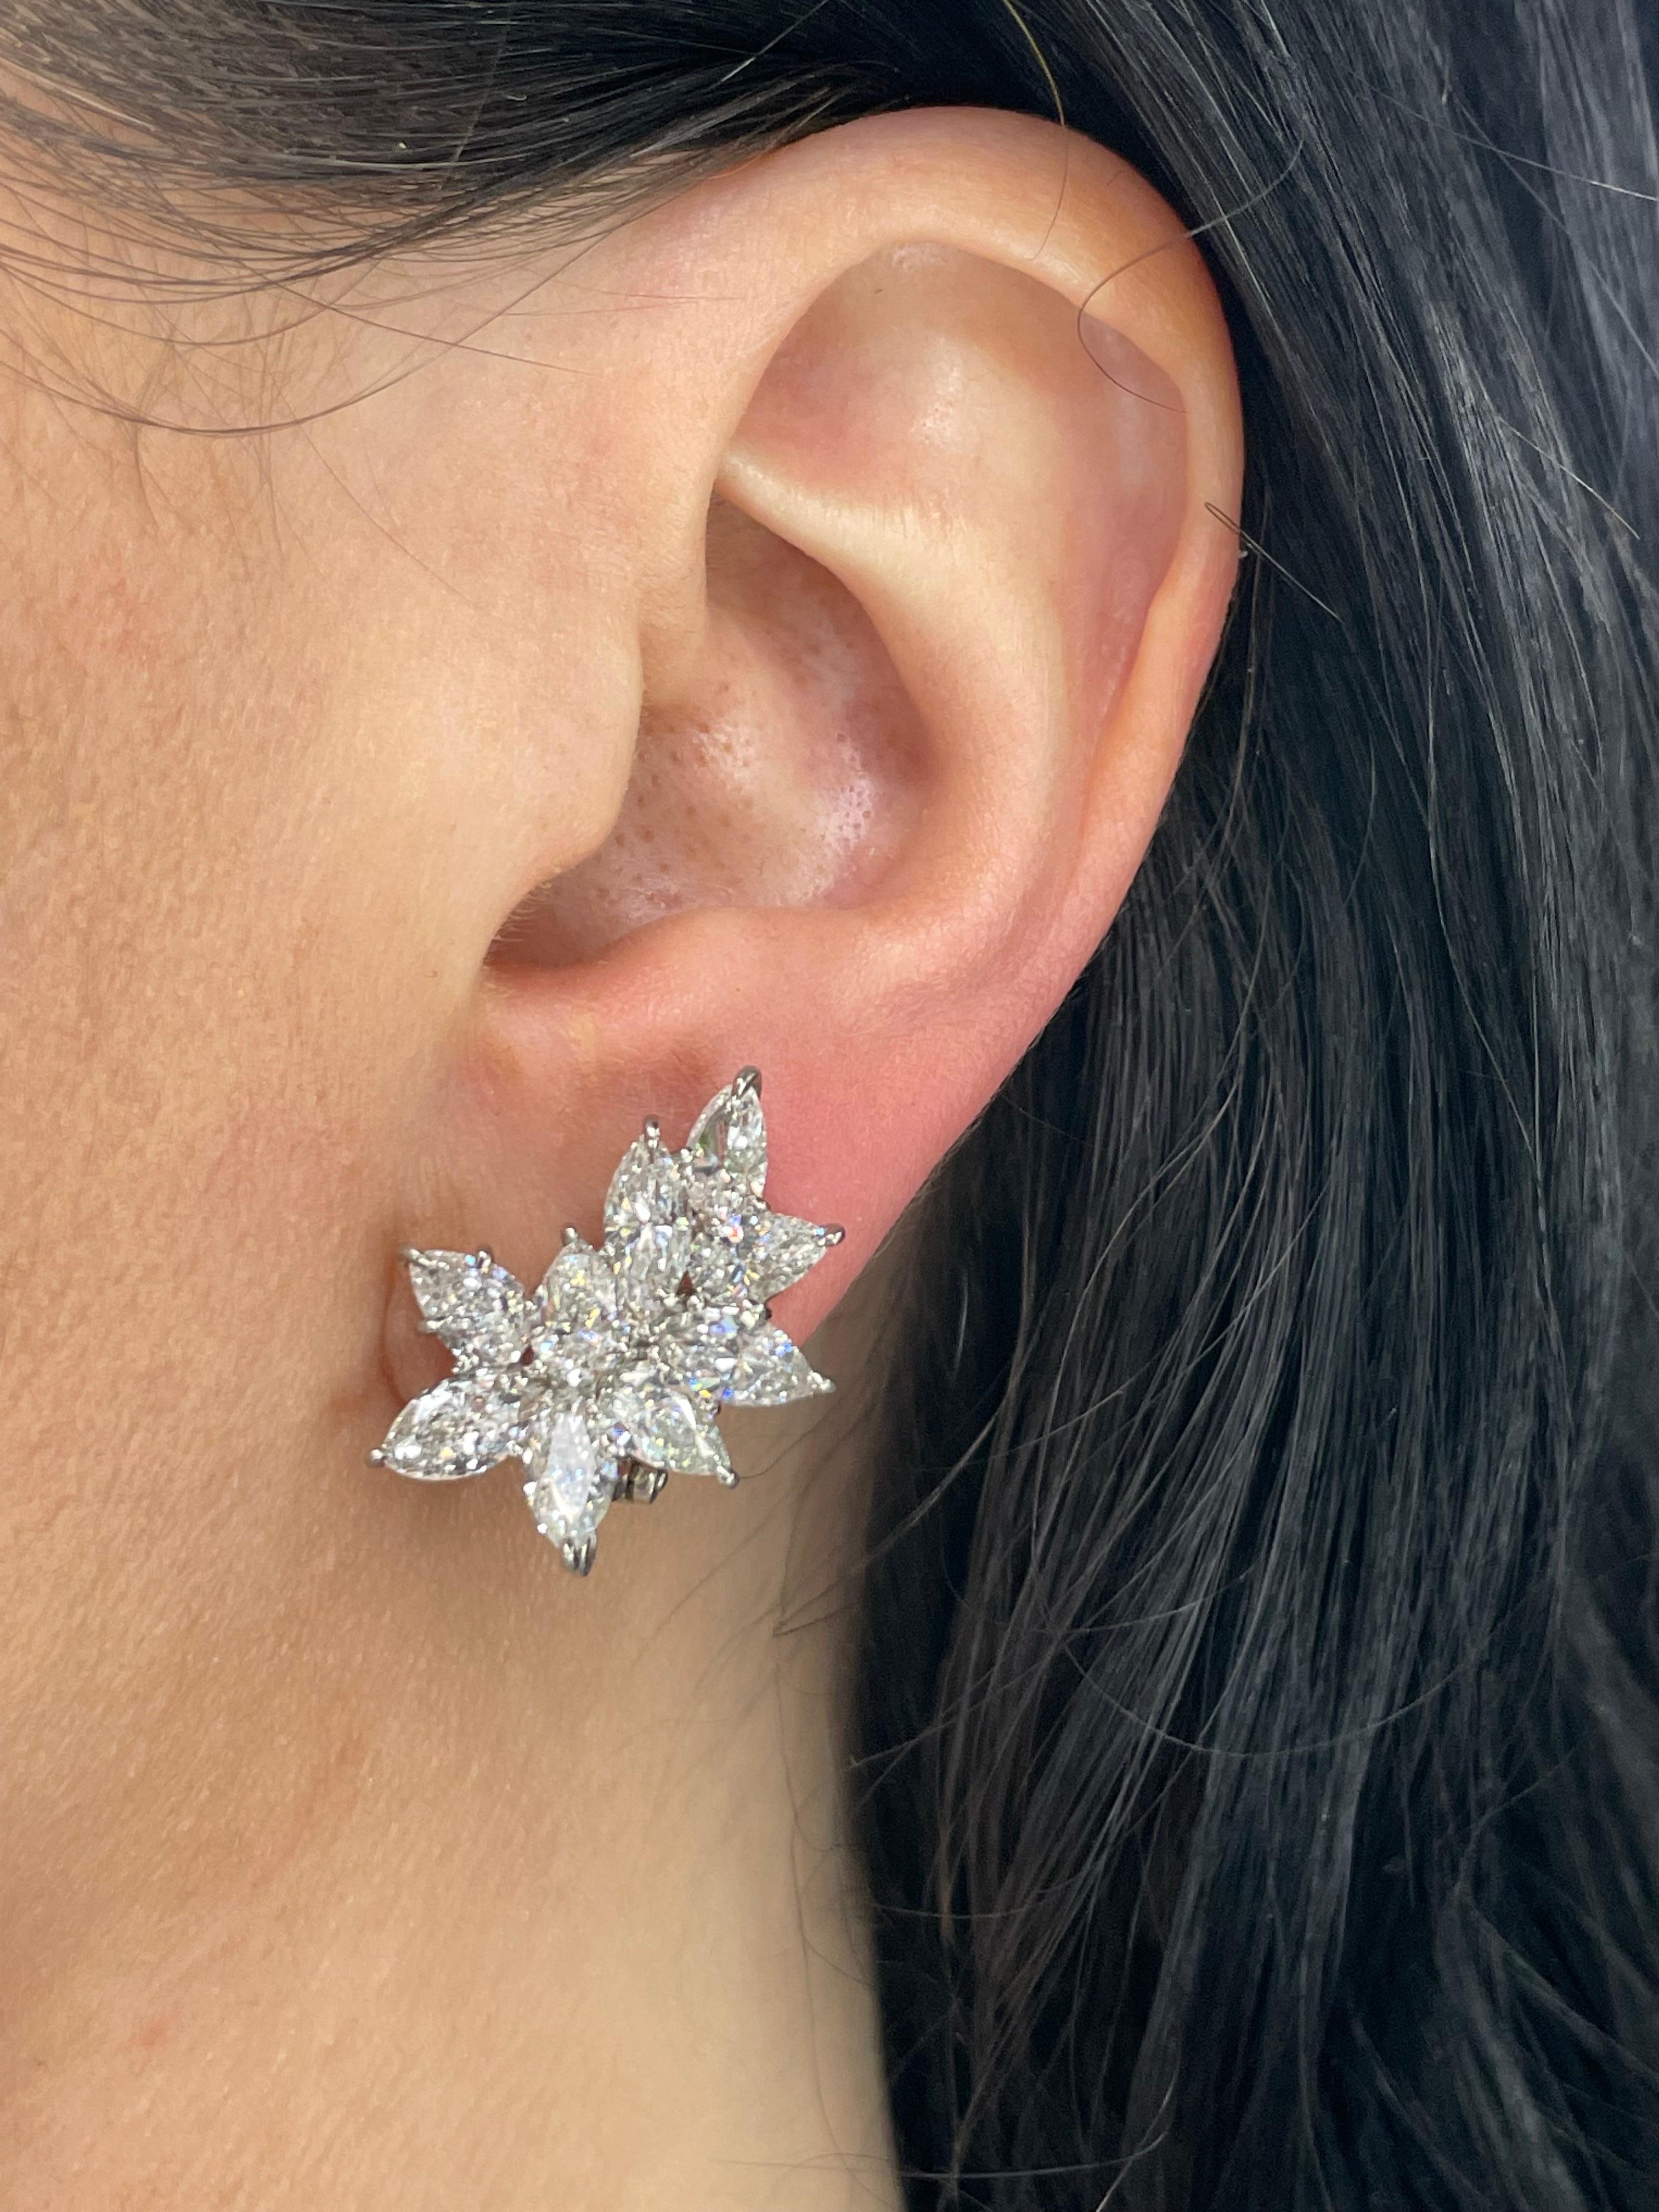 Crafted in Platinum, these cluster earrings feature 10 Pear Shape Diamonds & 8 Marquise Cut Diamonds weighing a total of 7.93 Carats.
Fresh Backing with a hook to add a Pearl or Gemstone.
Pearls are available.

DM for more pictures & videos.
These